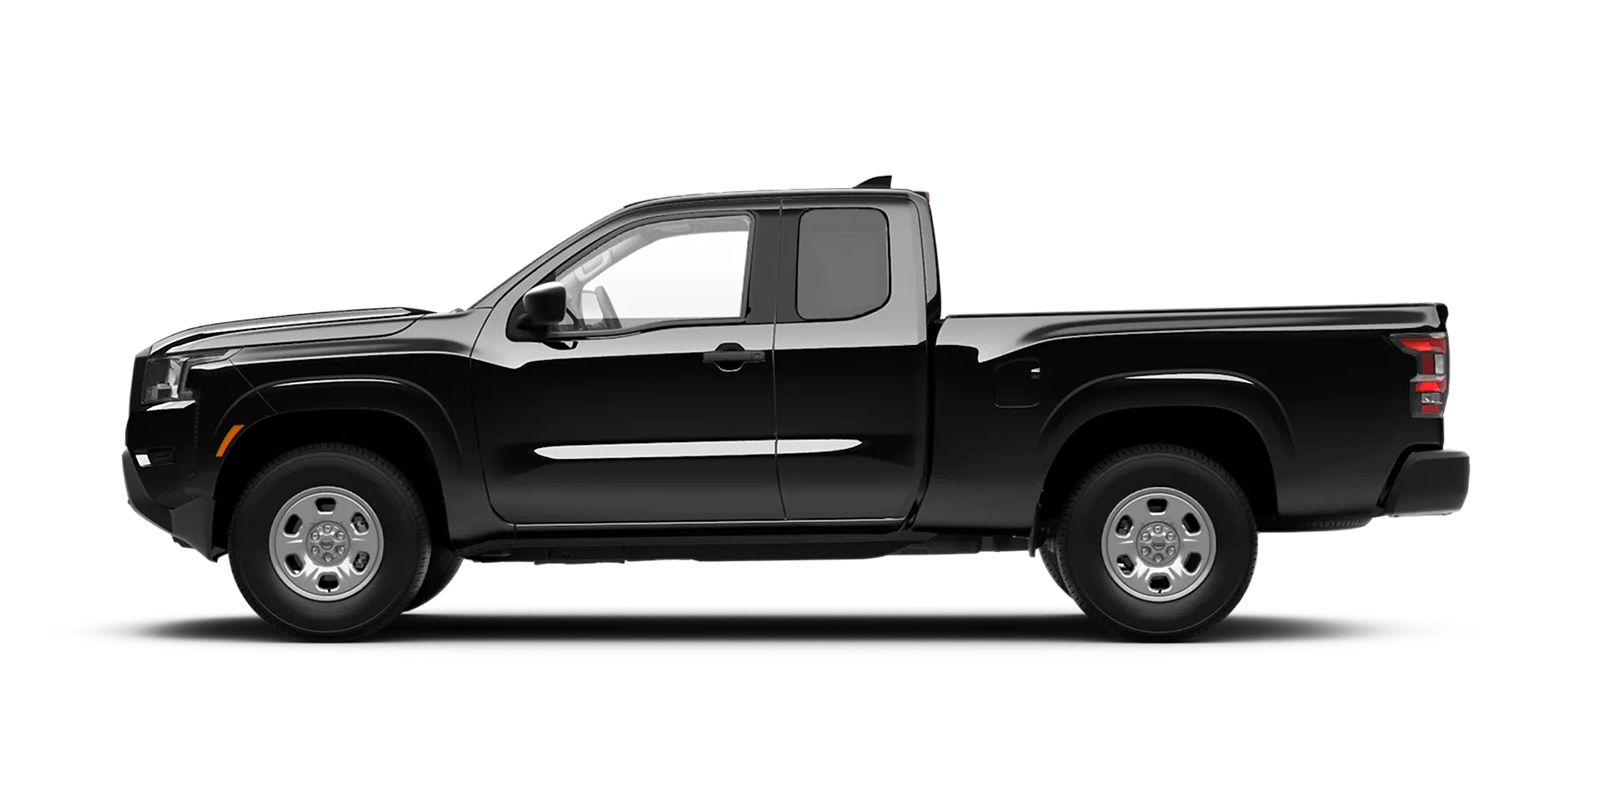 2022 Frontier King Cab S 4x2 in Super Black | Rolling Hills Nissan in Saint Joseph MO